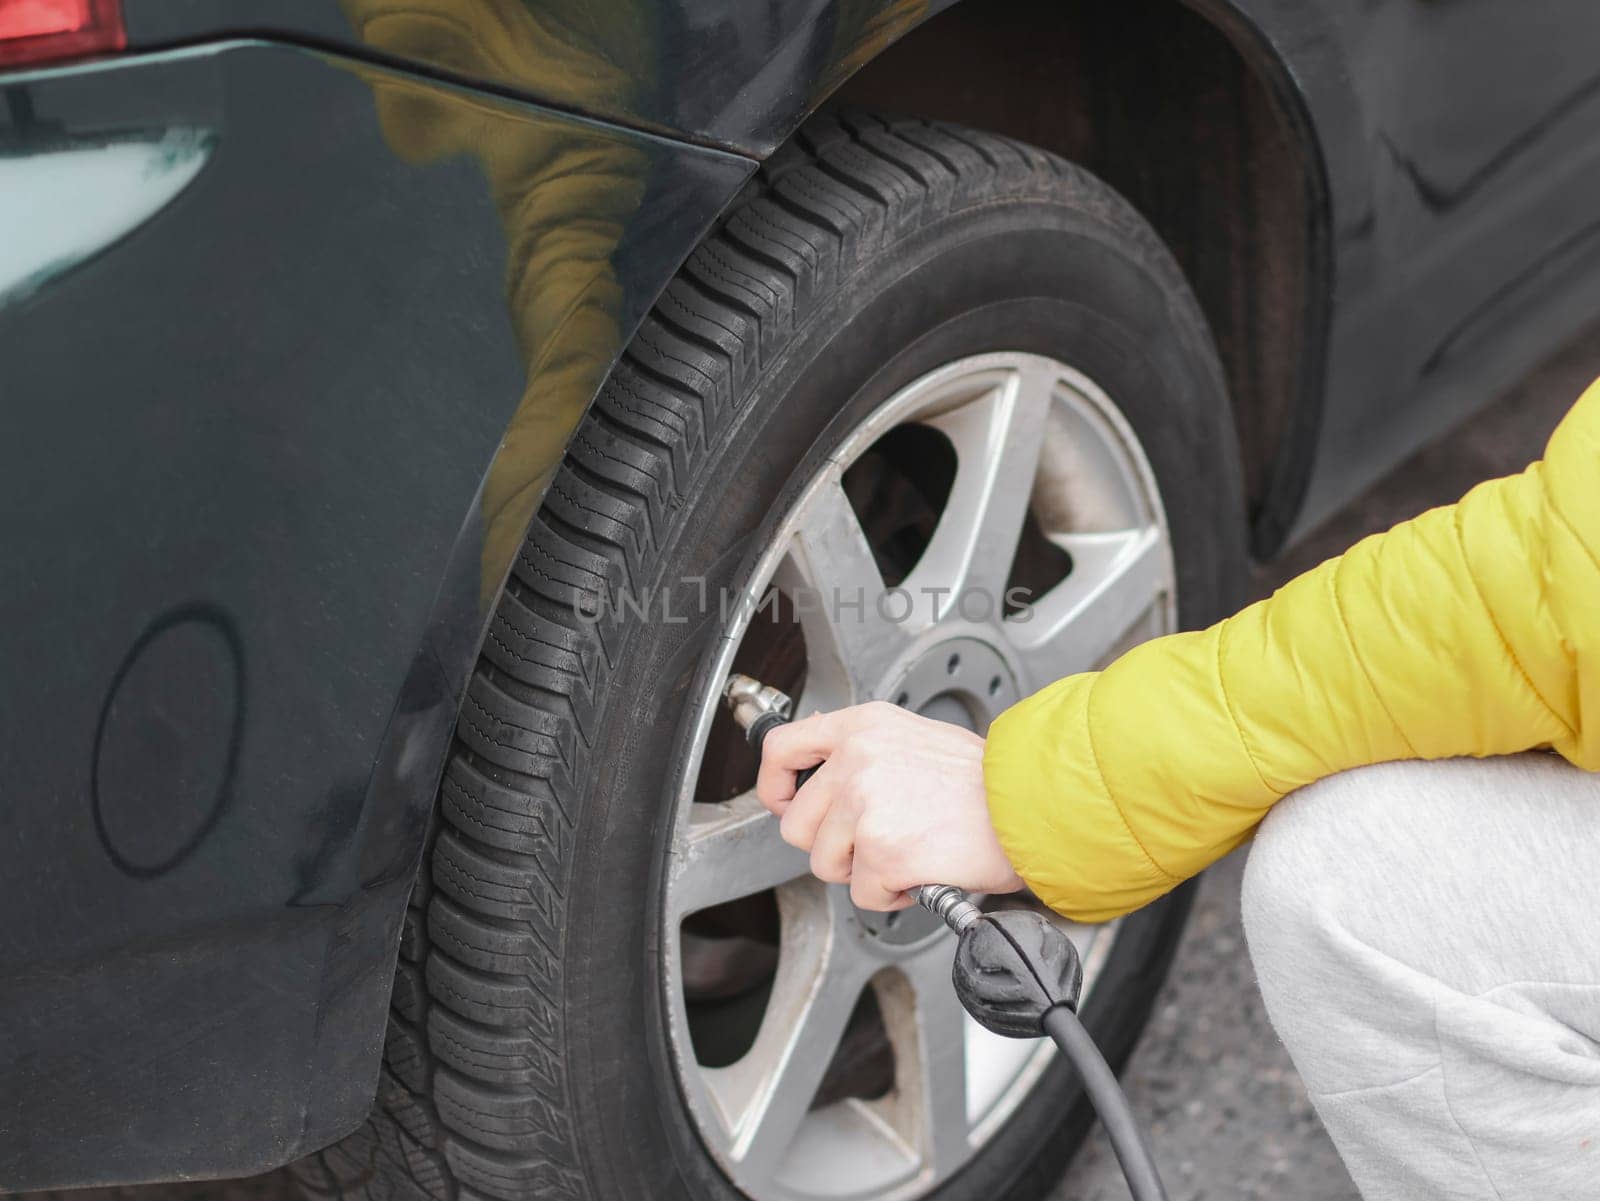 The hands of a young Caucasian man in a yellow jacket pump air with a compressor into the rear wheel of a car at a gas station, side view with selective focus and close-up. Gas station concept.